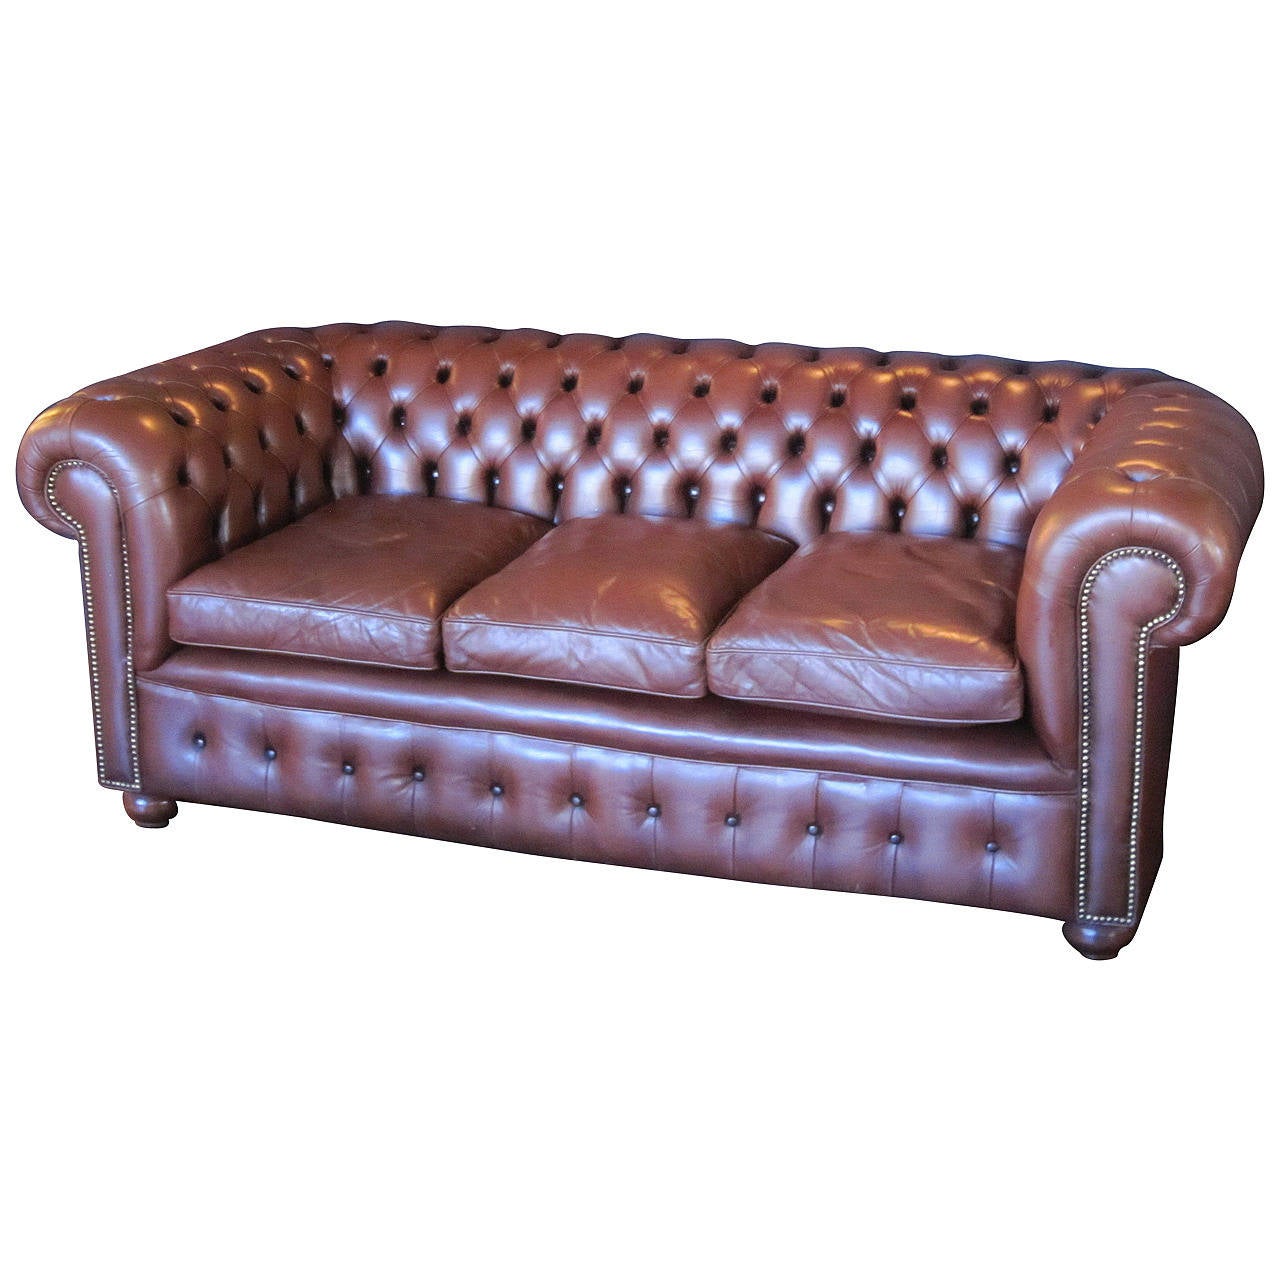 English Chesterfield Sofa For Sale At 1stdibs